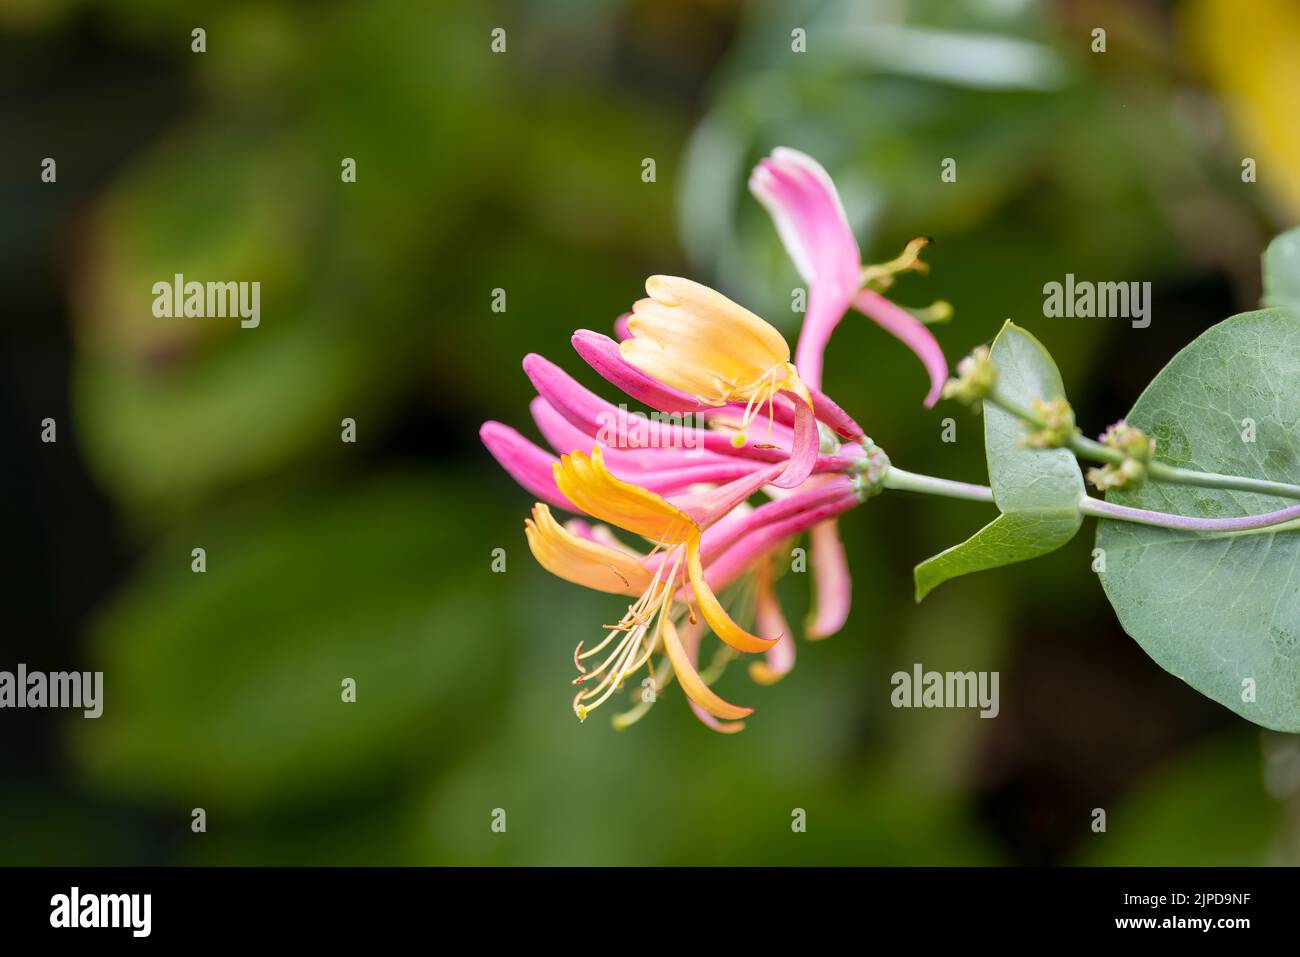 A beautiful Common Honeysuckle (Lonicera periclymenum) with out of focus green foliage flowers in the background Stock Photo